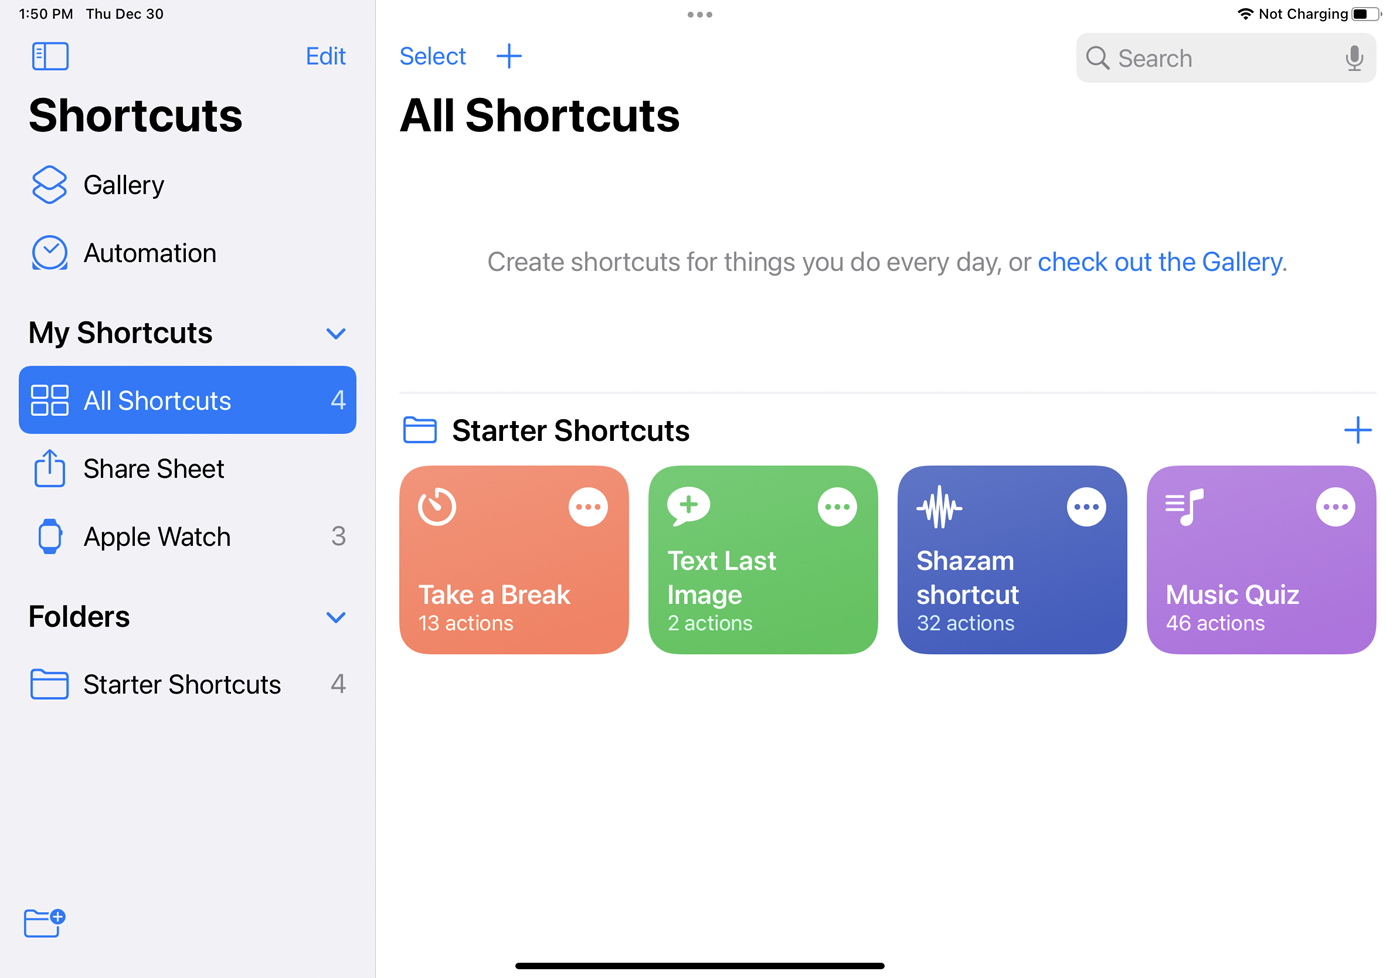 How to Automate Your Life With Apple&039s Shortcuts App